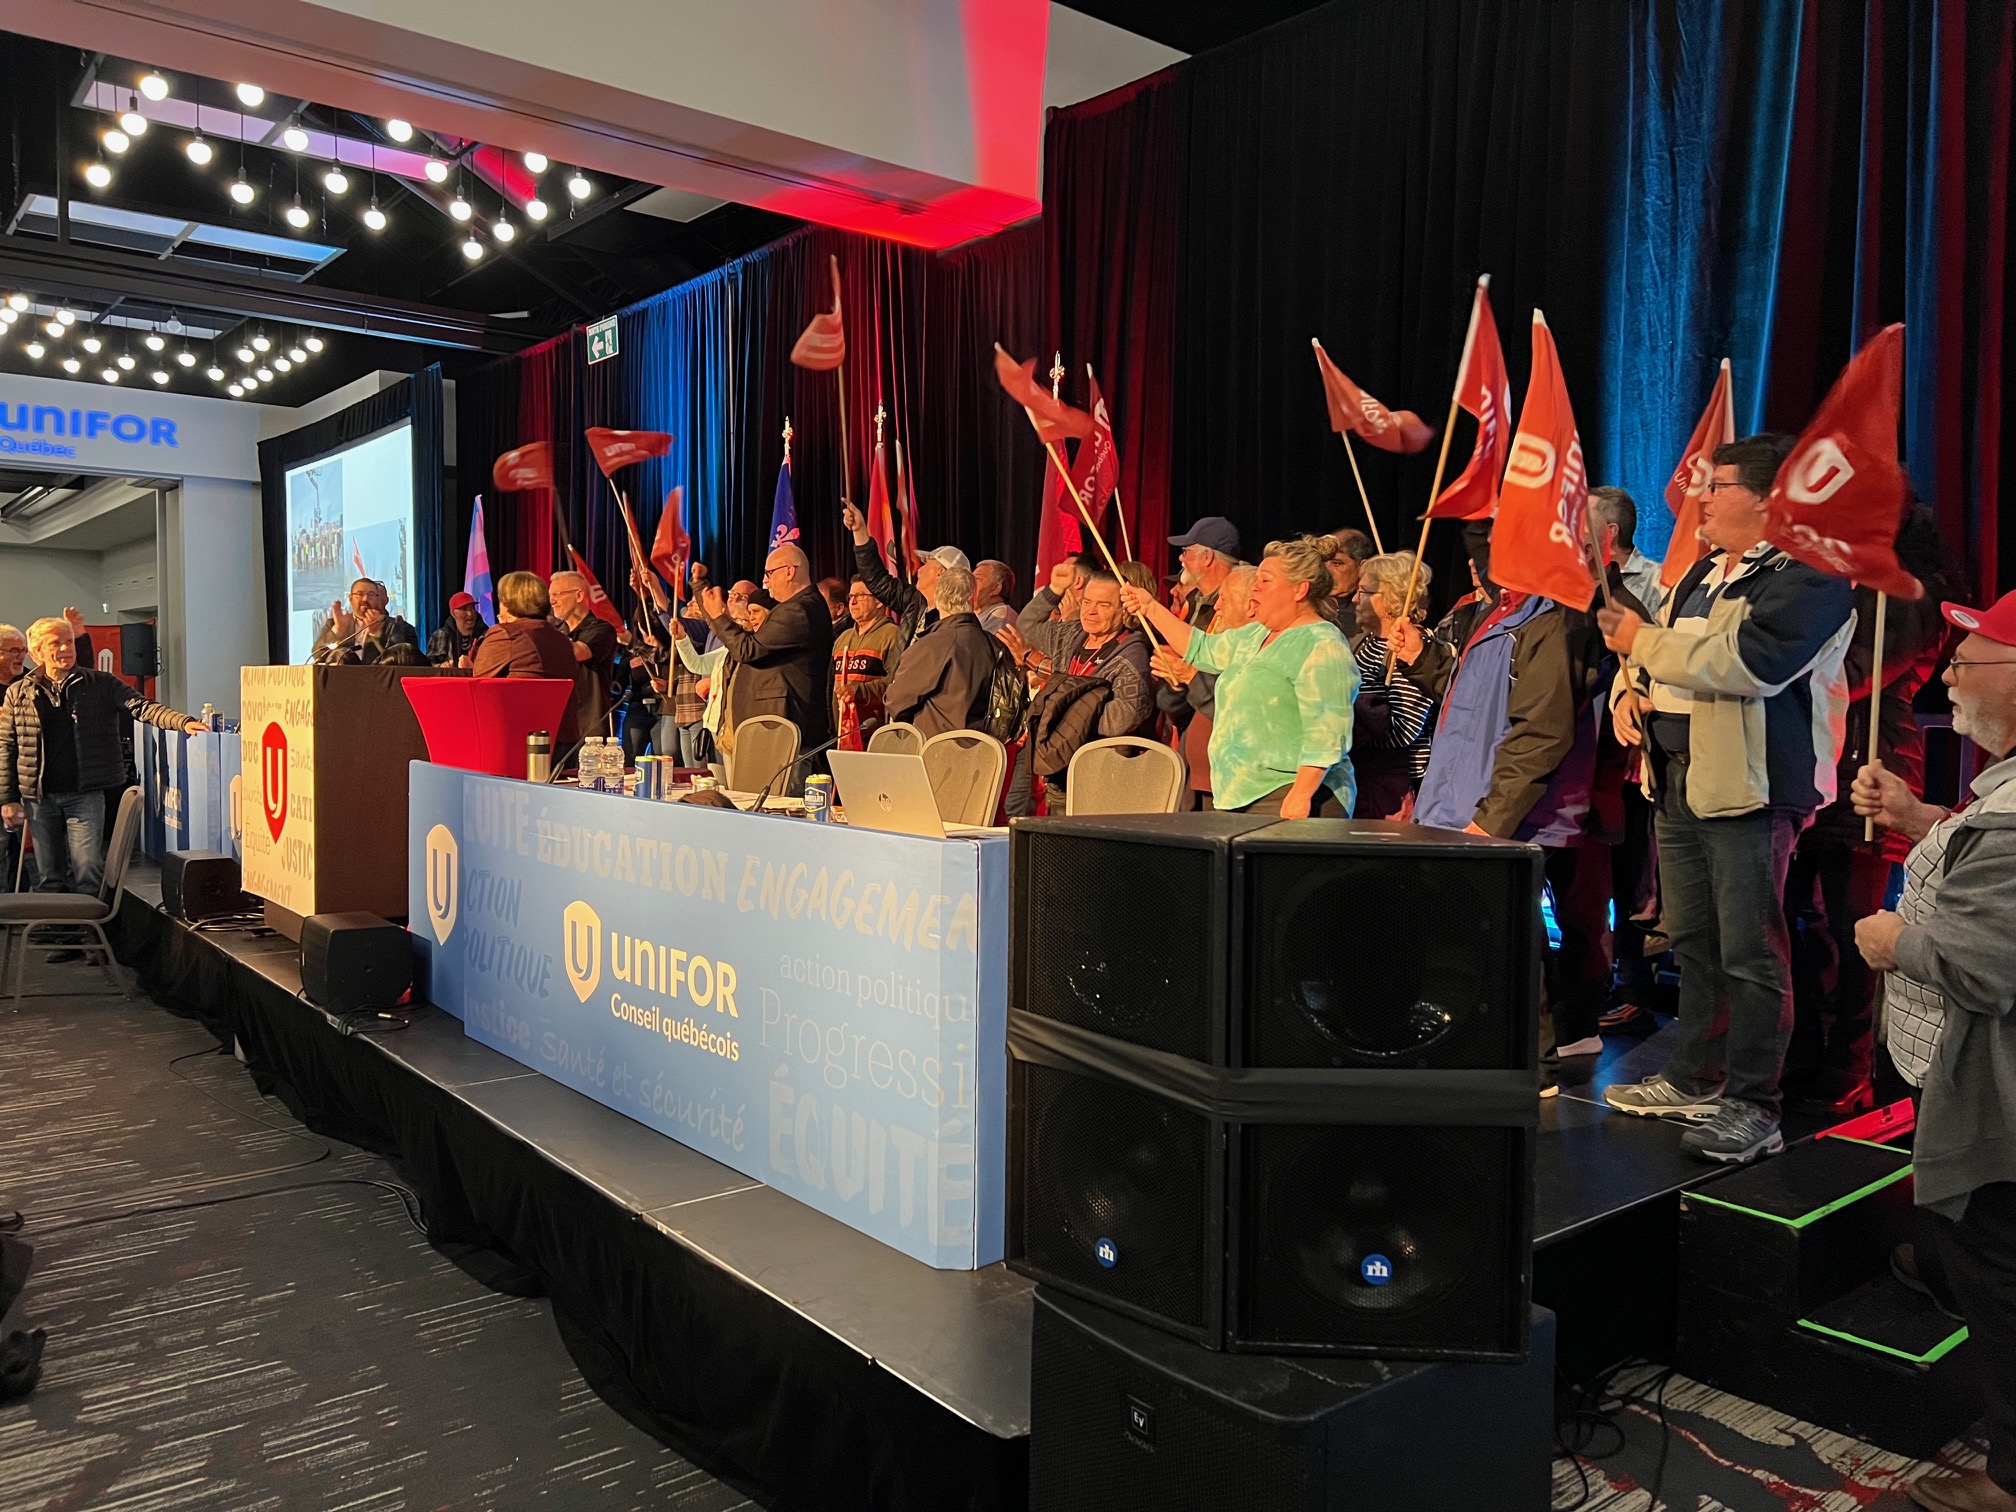 A group of people cheer and wave red Unifor flags while standing on a stage.